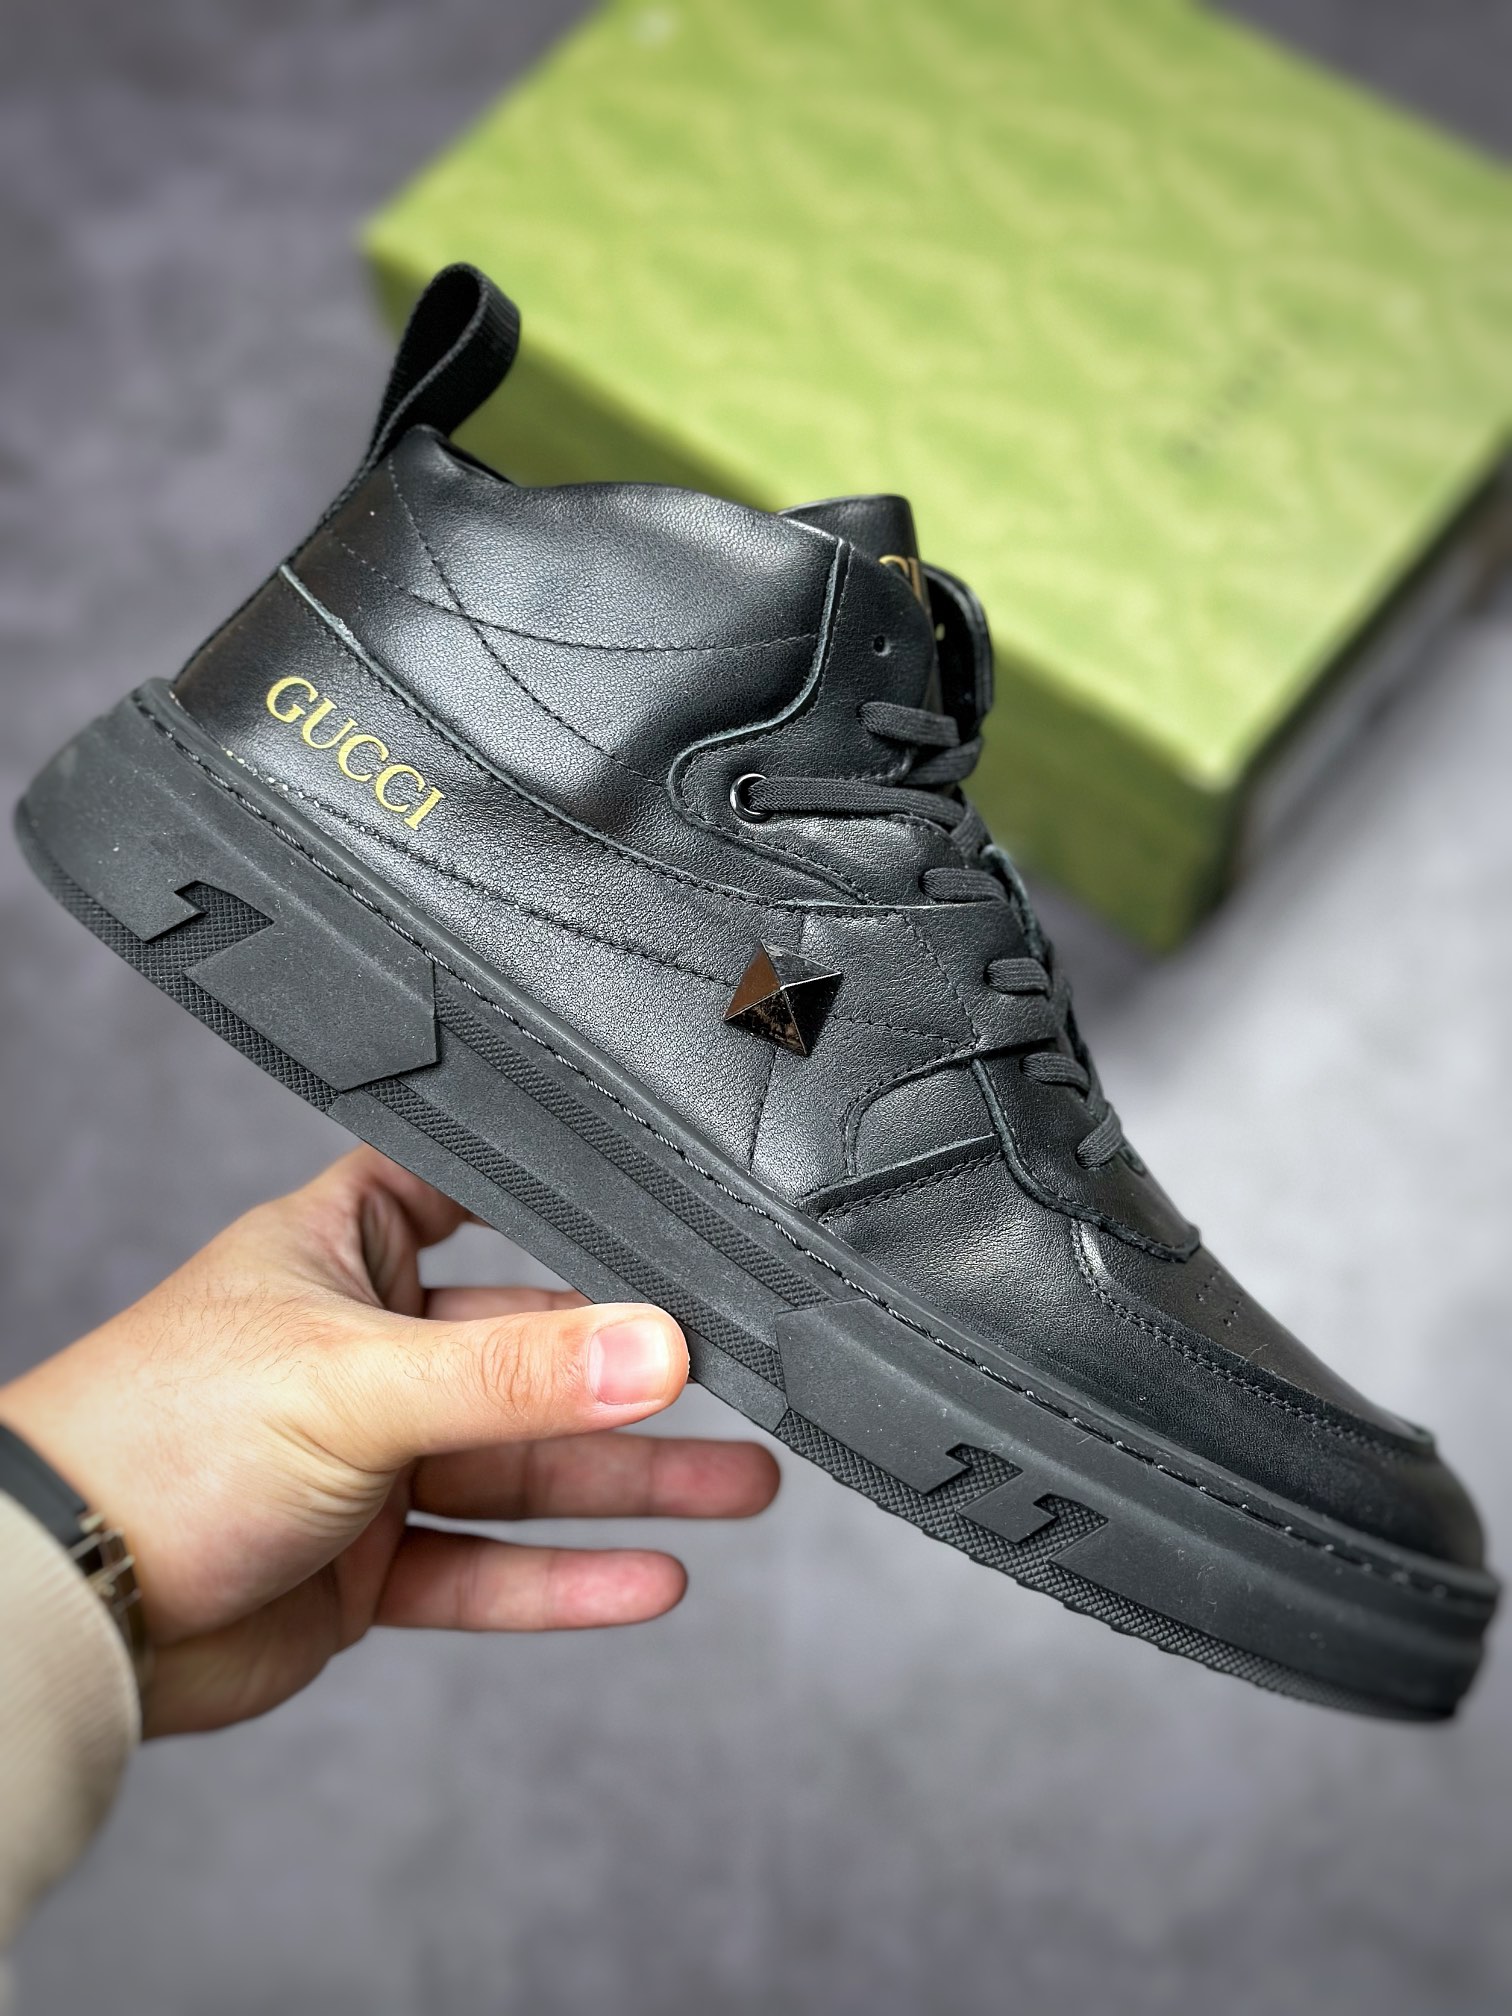 Gucci The Hacker Project mid-cut sports casual trendy shoes series